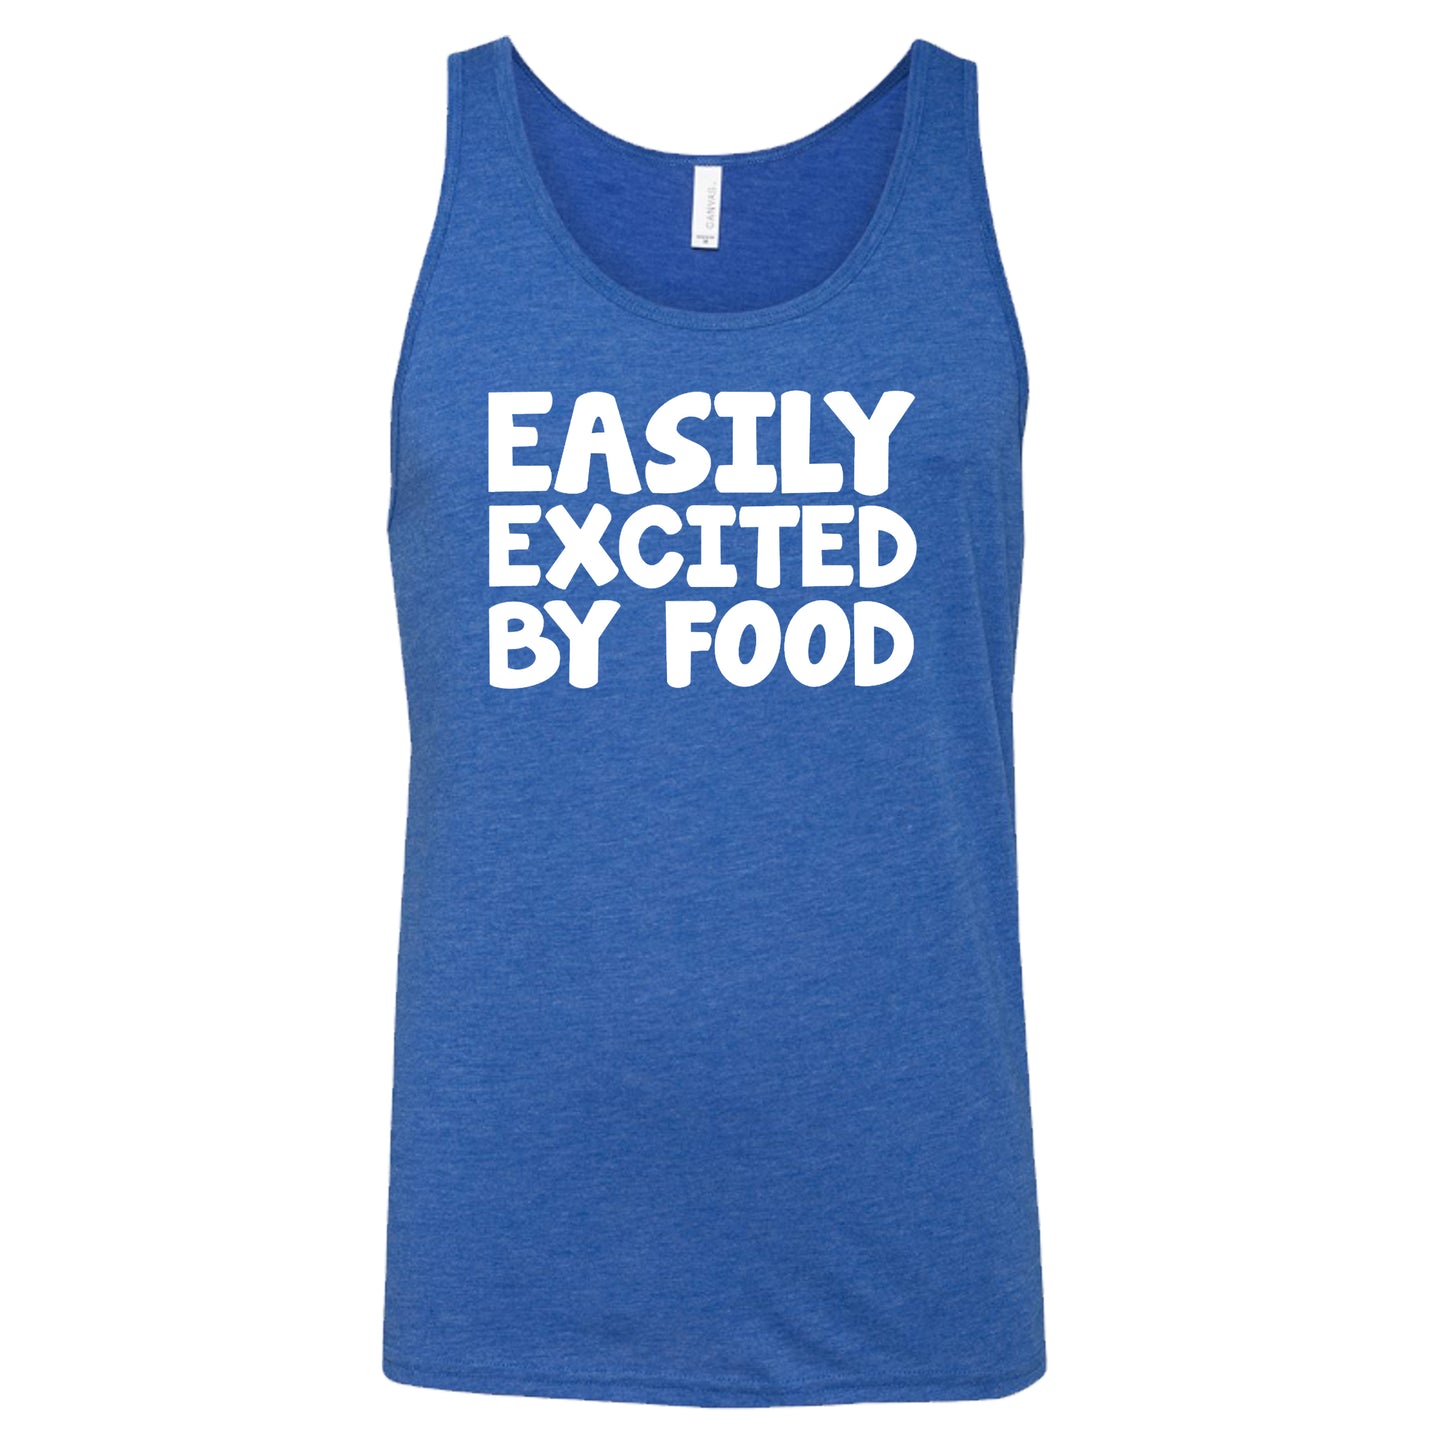 Easily Excited By Food Shirt Unisex